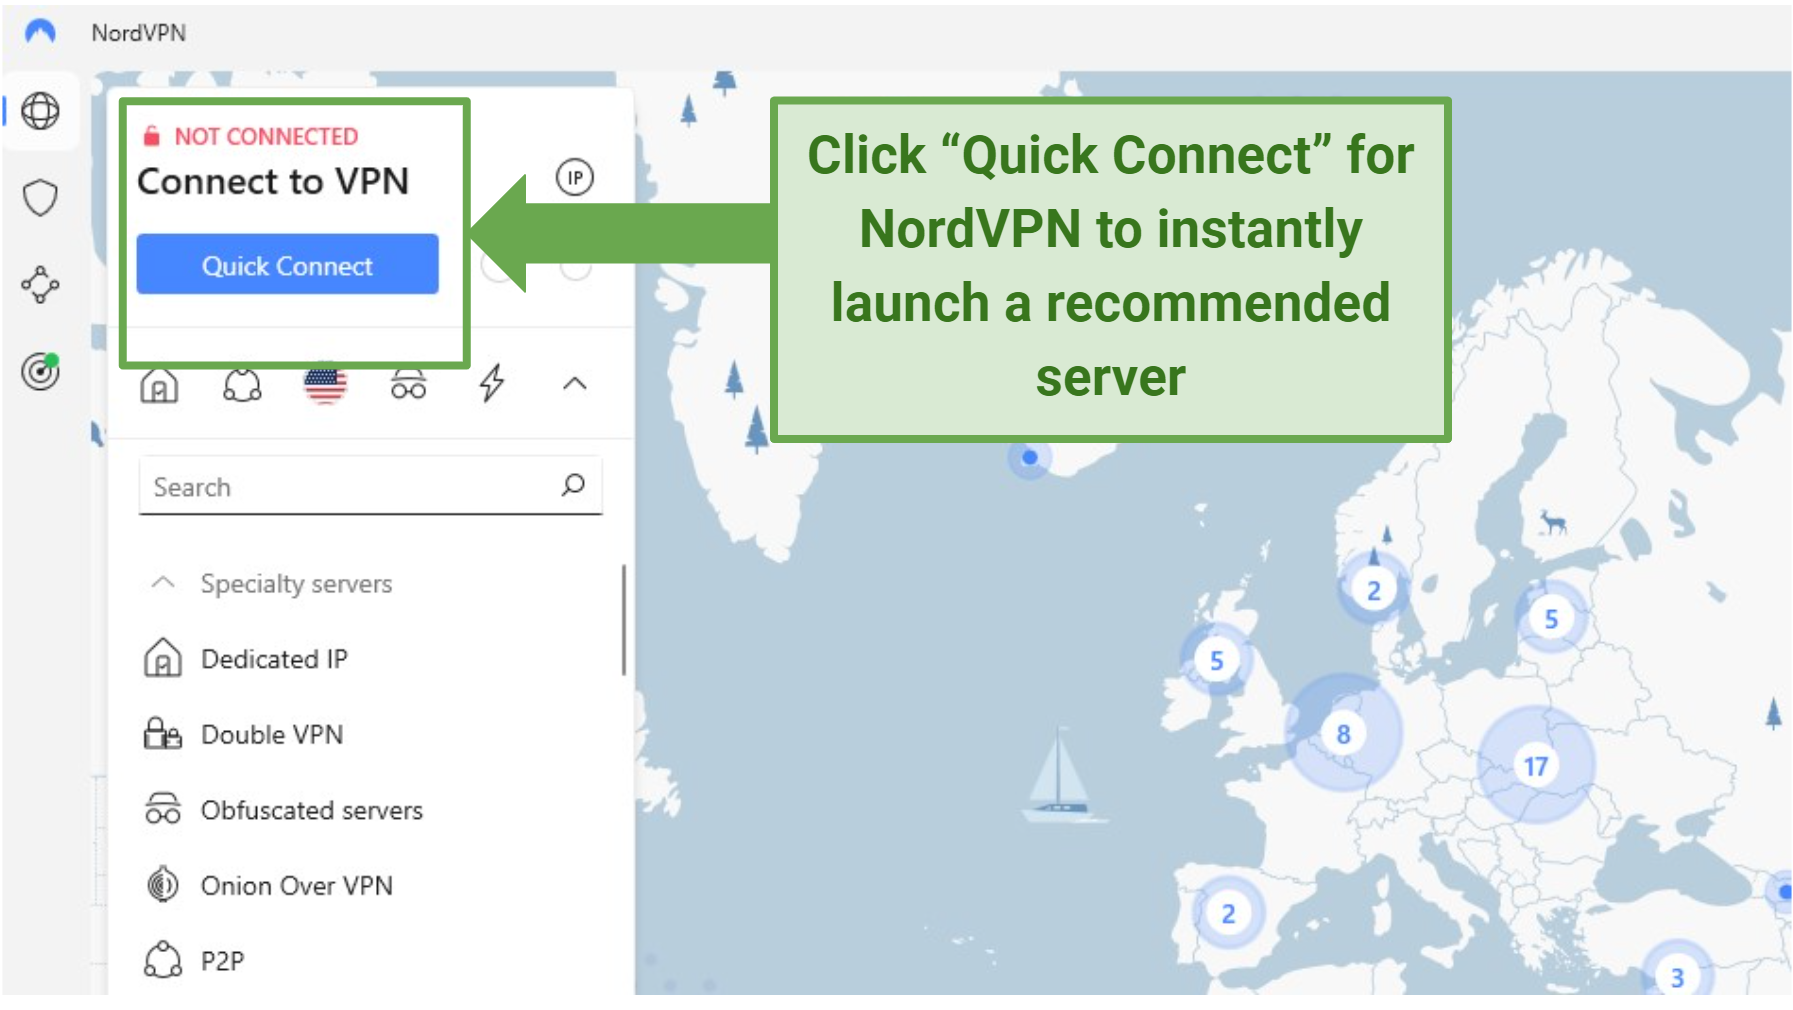 A screenshot of NordVPN's Quick Connect feature